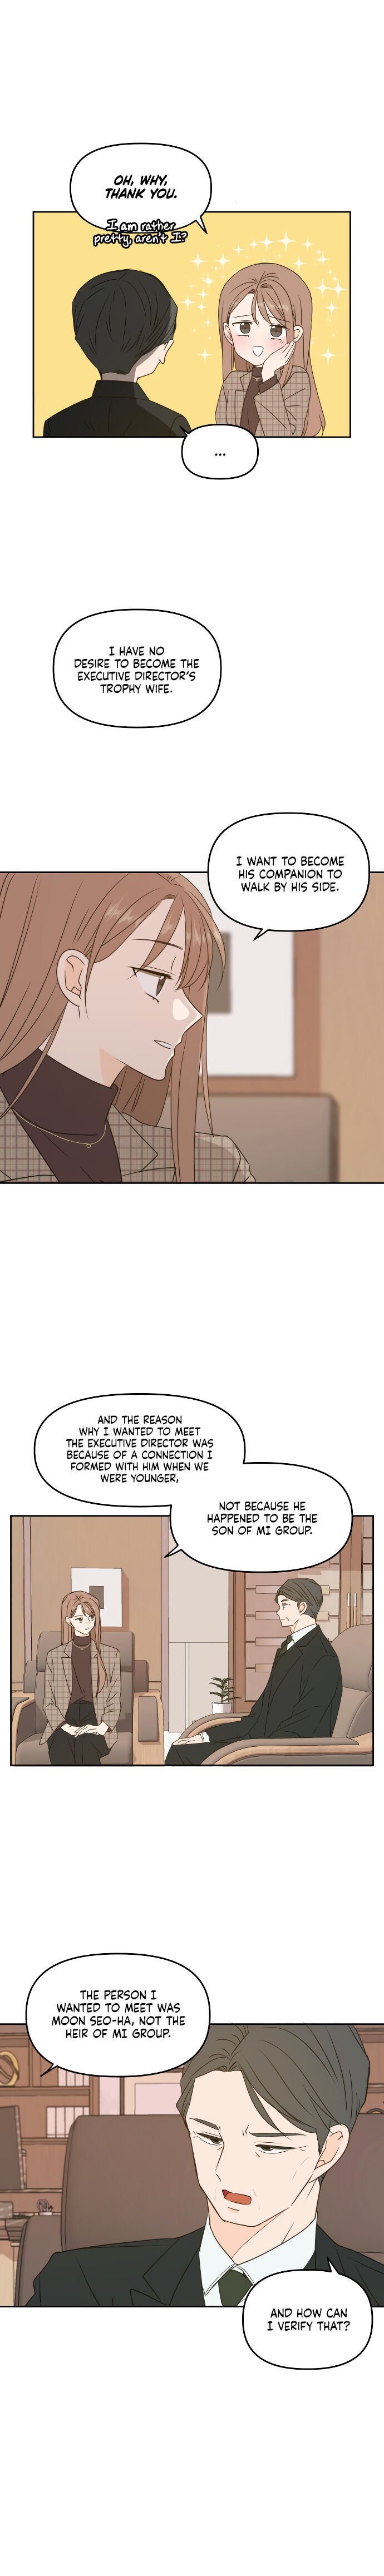 Please Take Care Of Me In This Life As Well - Page 3